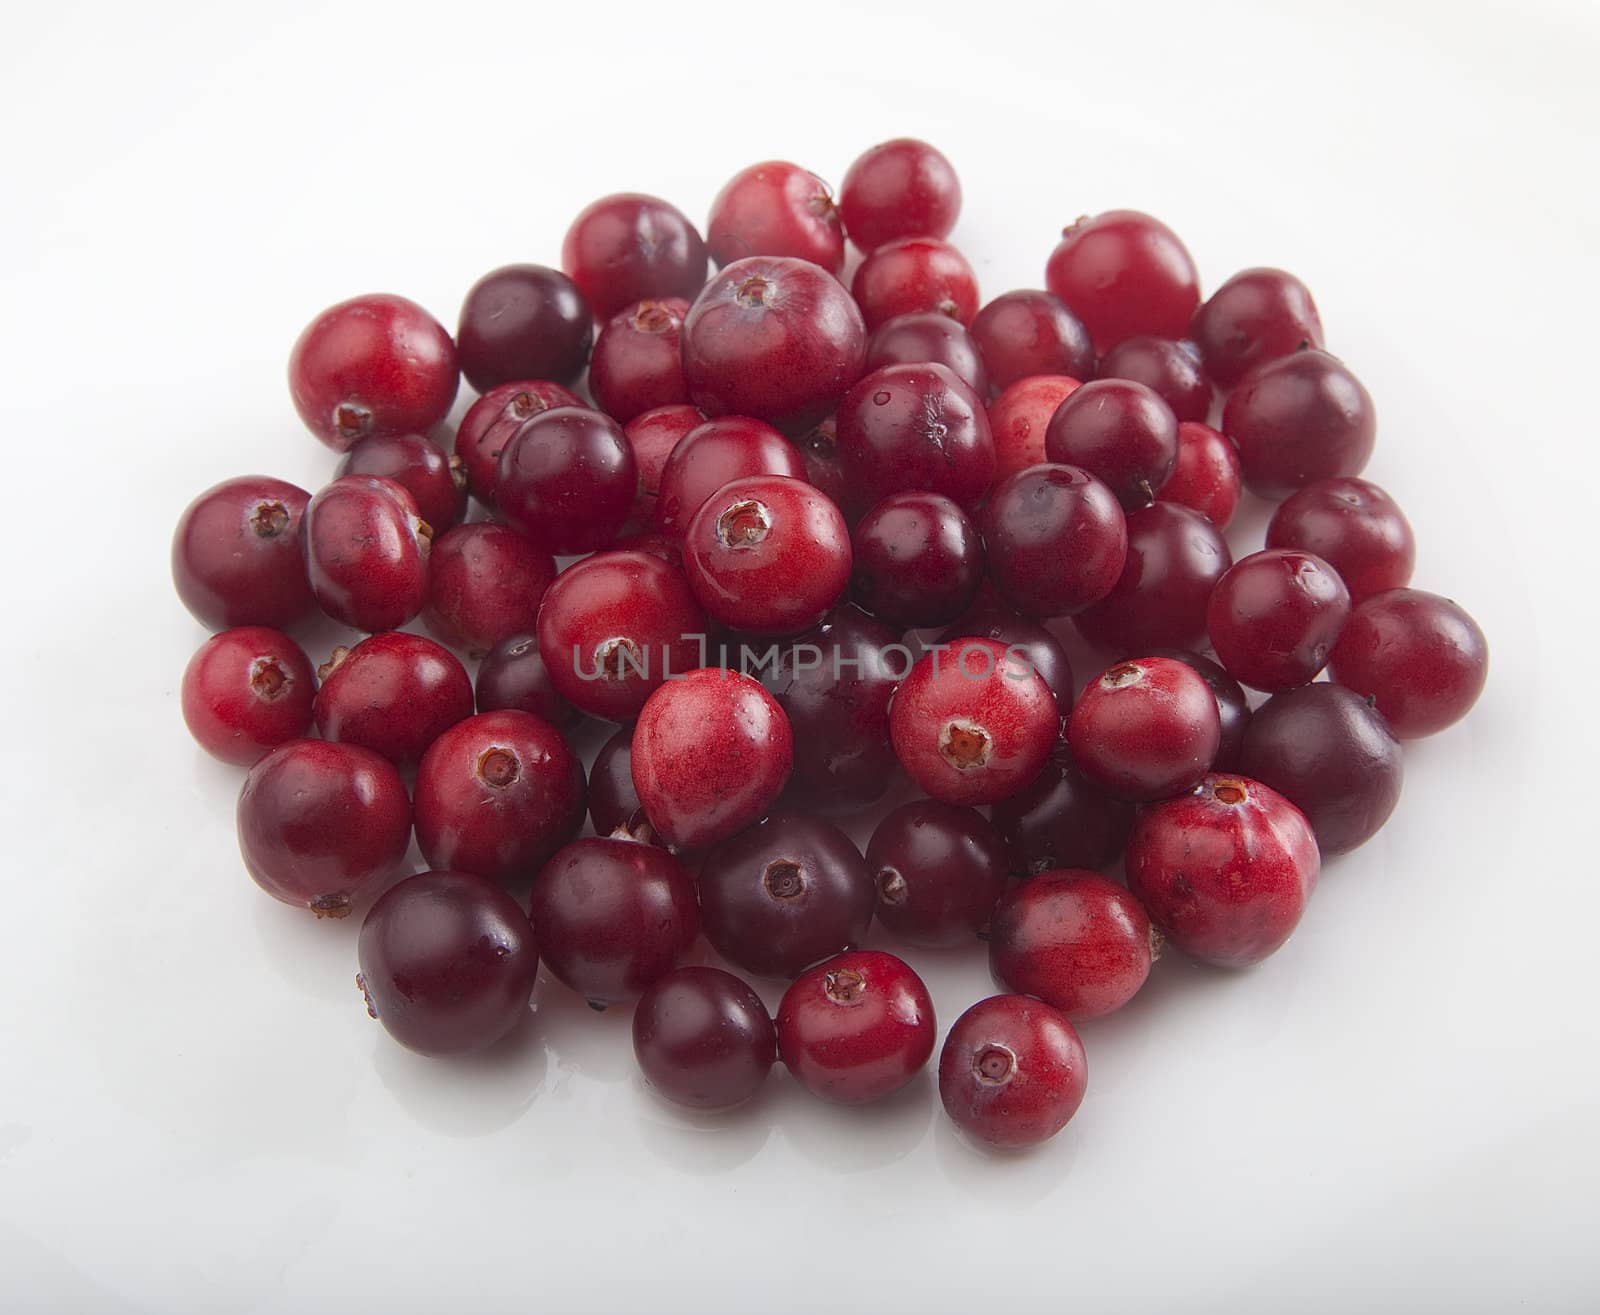 Hanful of red cranberries on the white